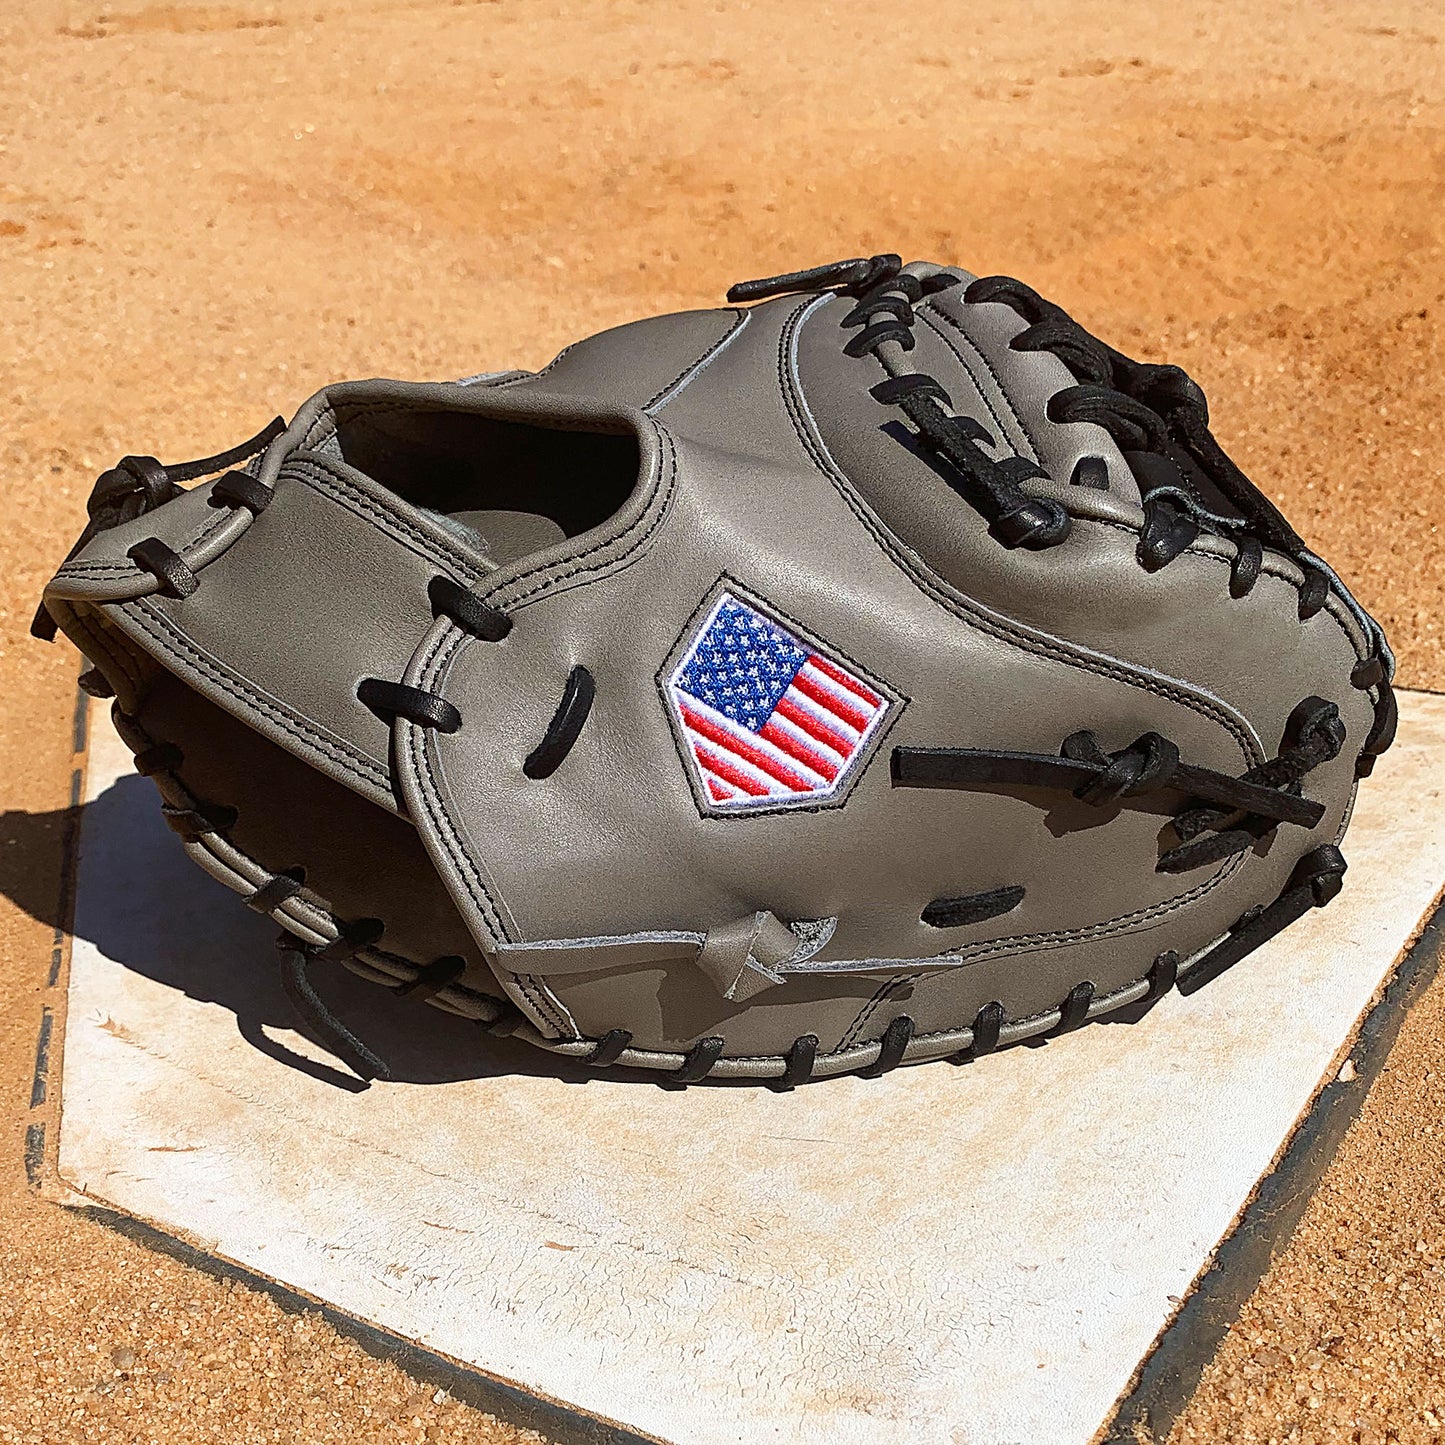 33.5" Baseball Catcher's Mitt - Gray with Black Web and Black Laces